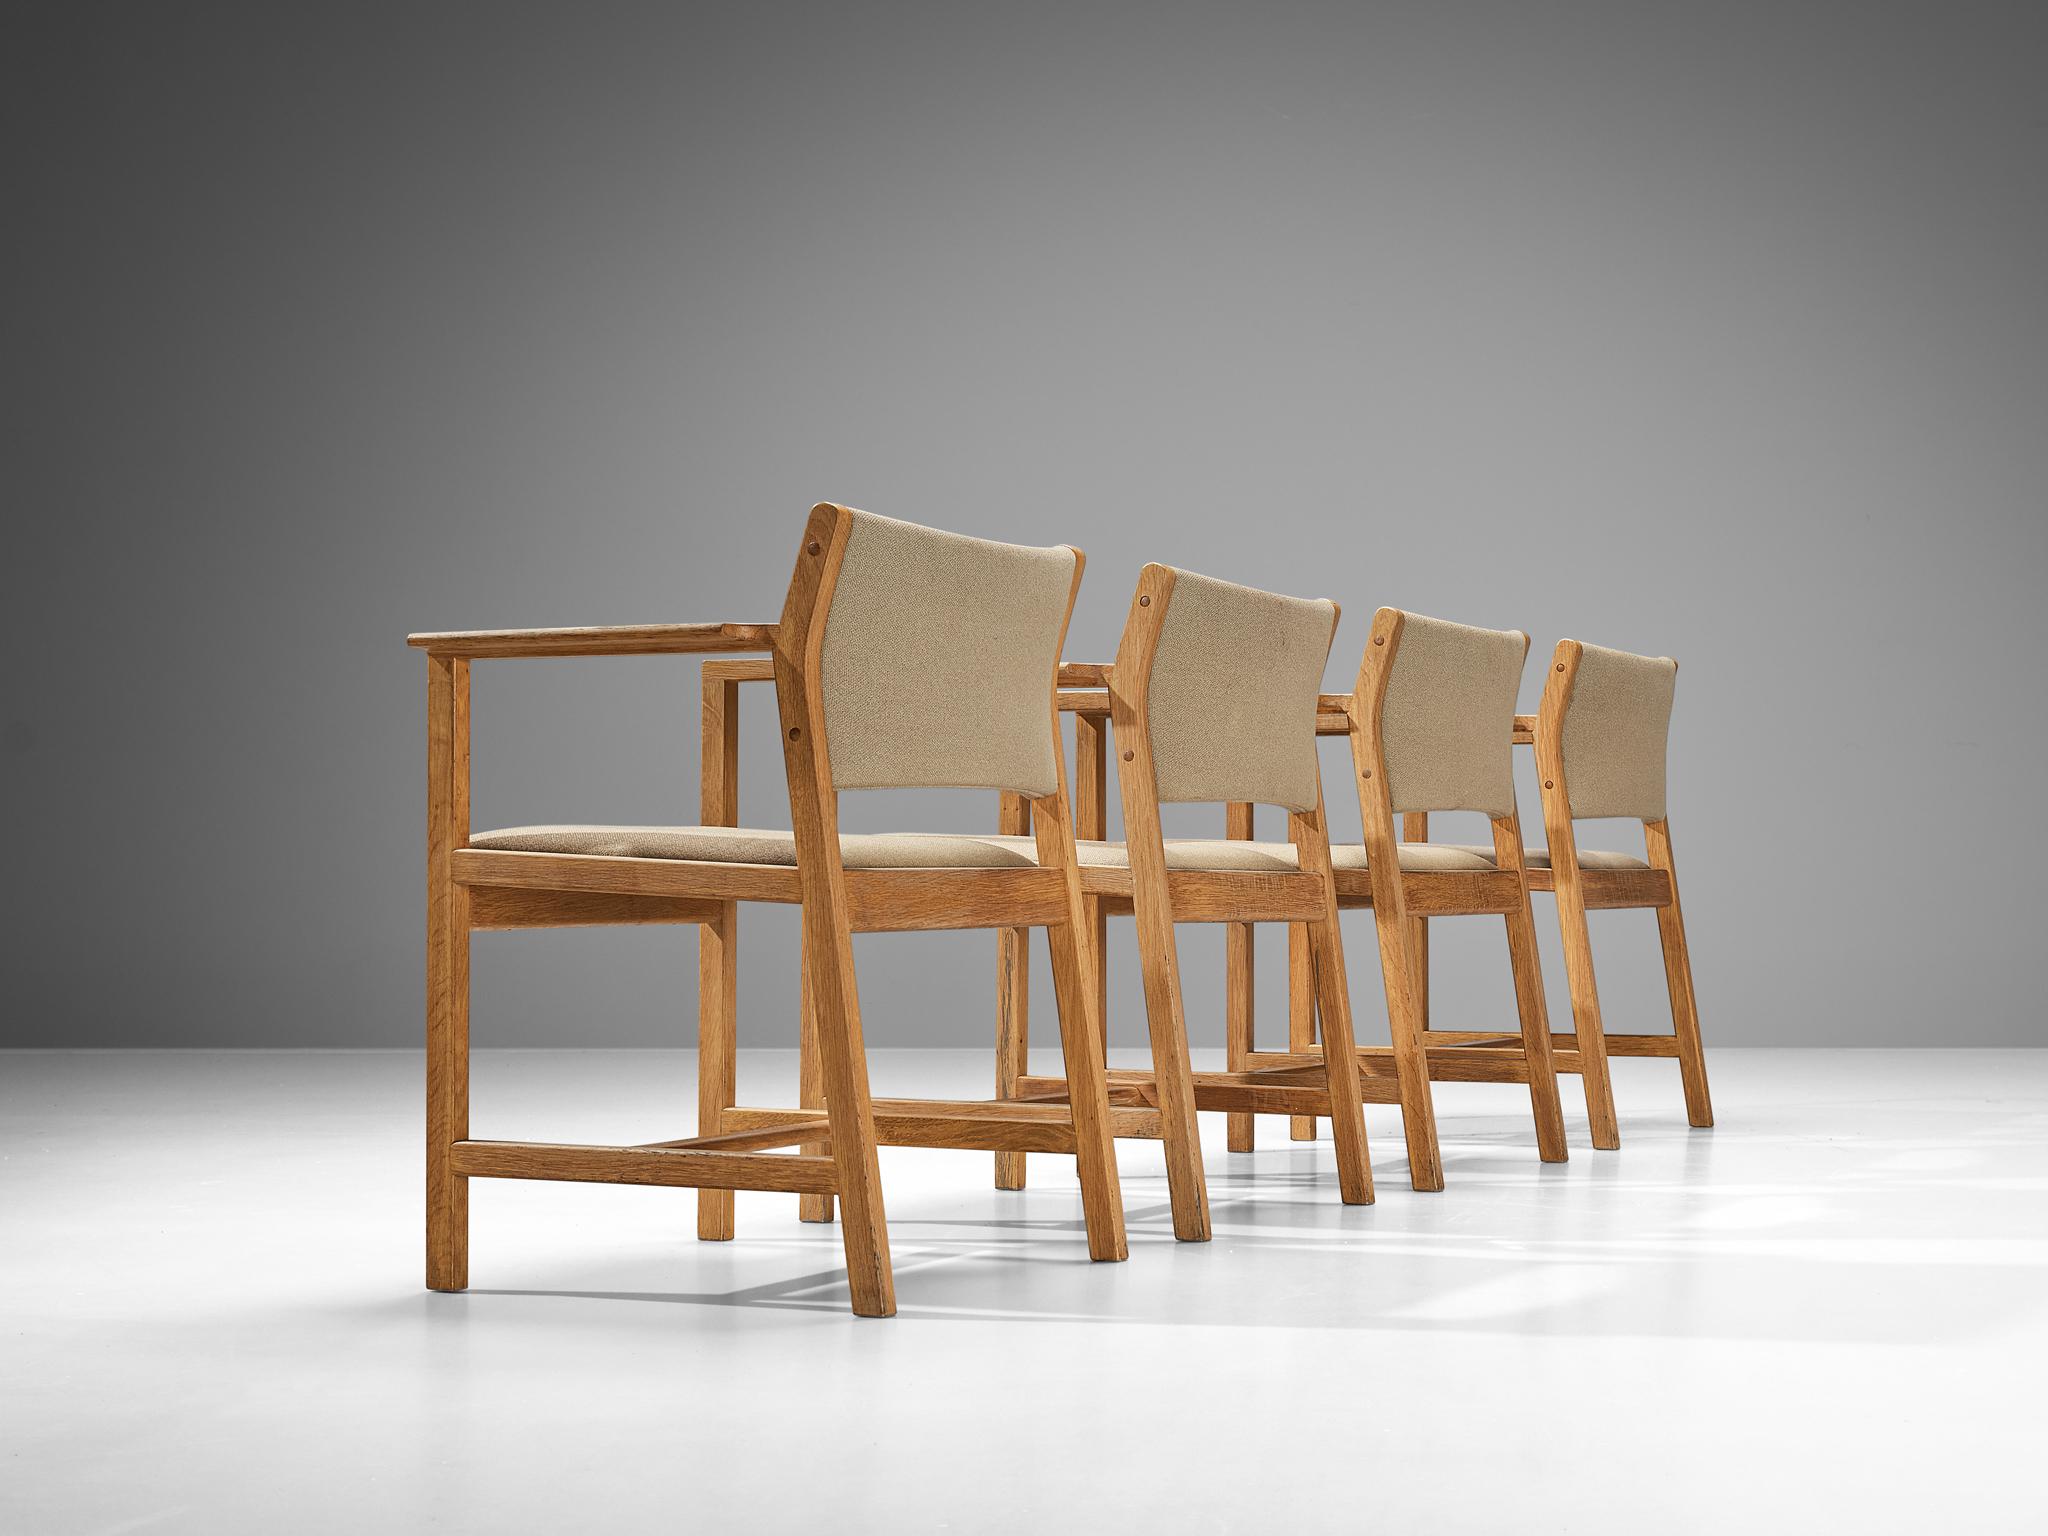 Staten Kontrol Møbler, armchairs, oak, fabric, Denmark, 1960s. 

Set of four Danish armchairs manufactured by Staten Kontrol Møbler. Theis model with a rounded seat has a characteristic, sculptural frame. The tilted rear legs with sharp edges